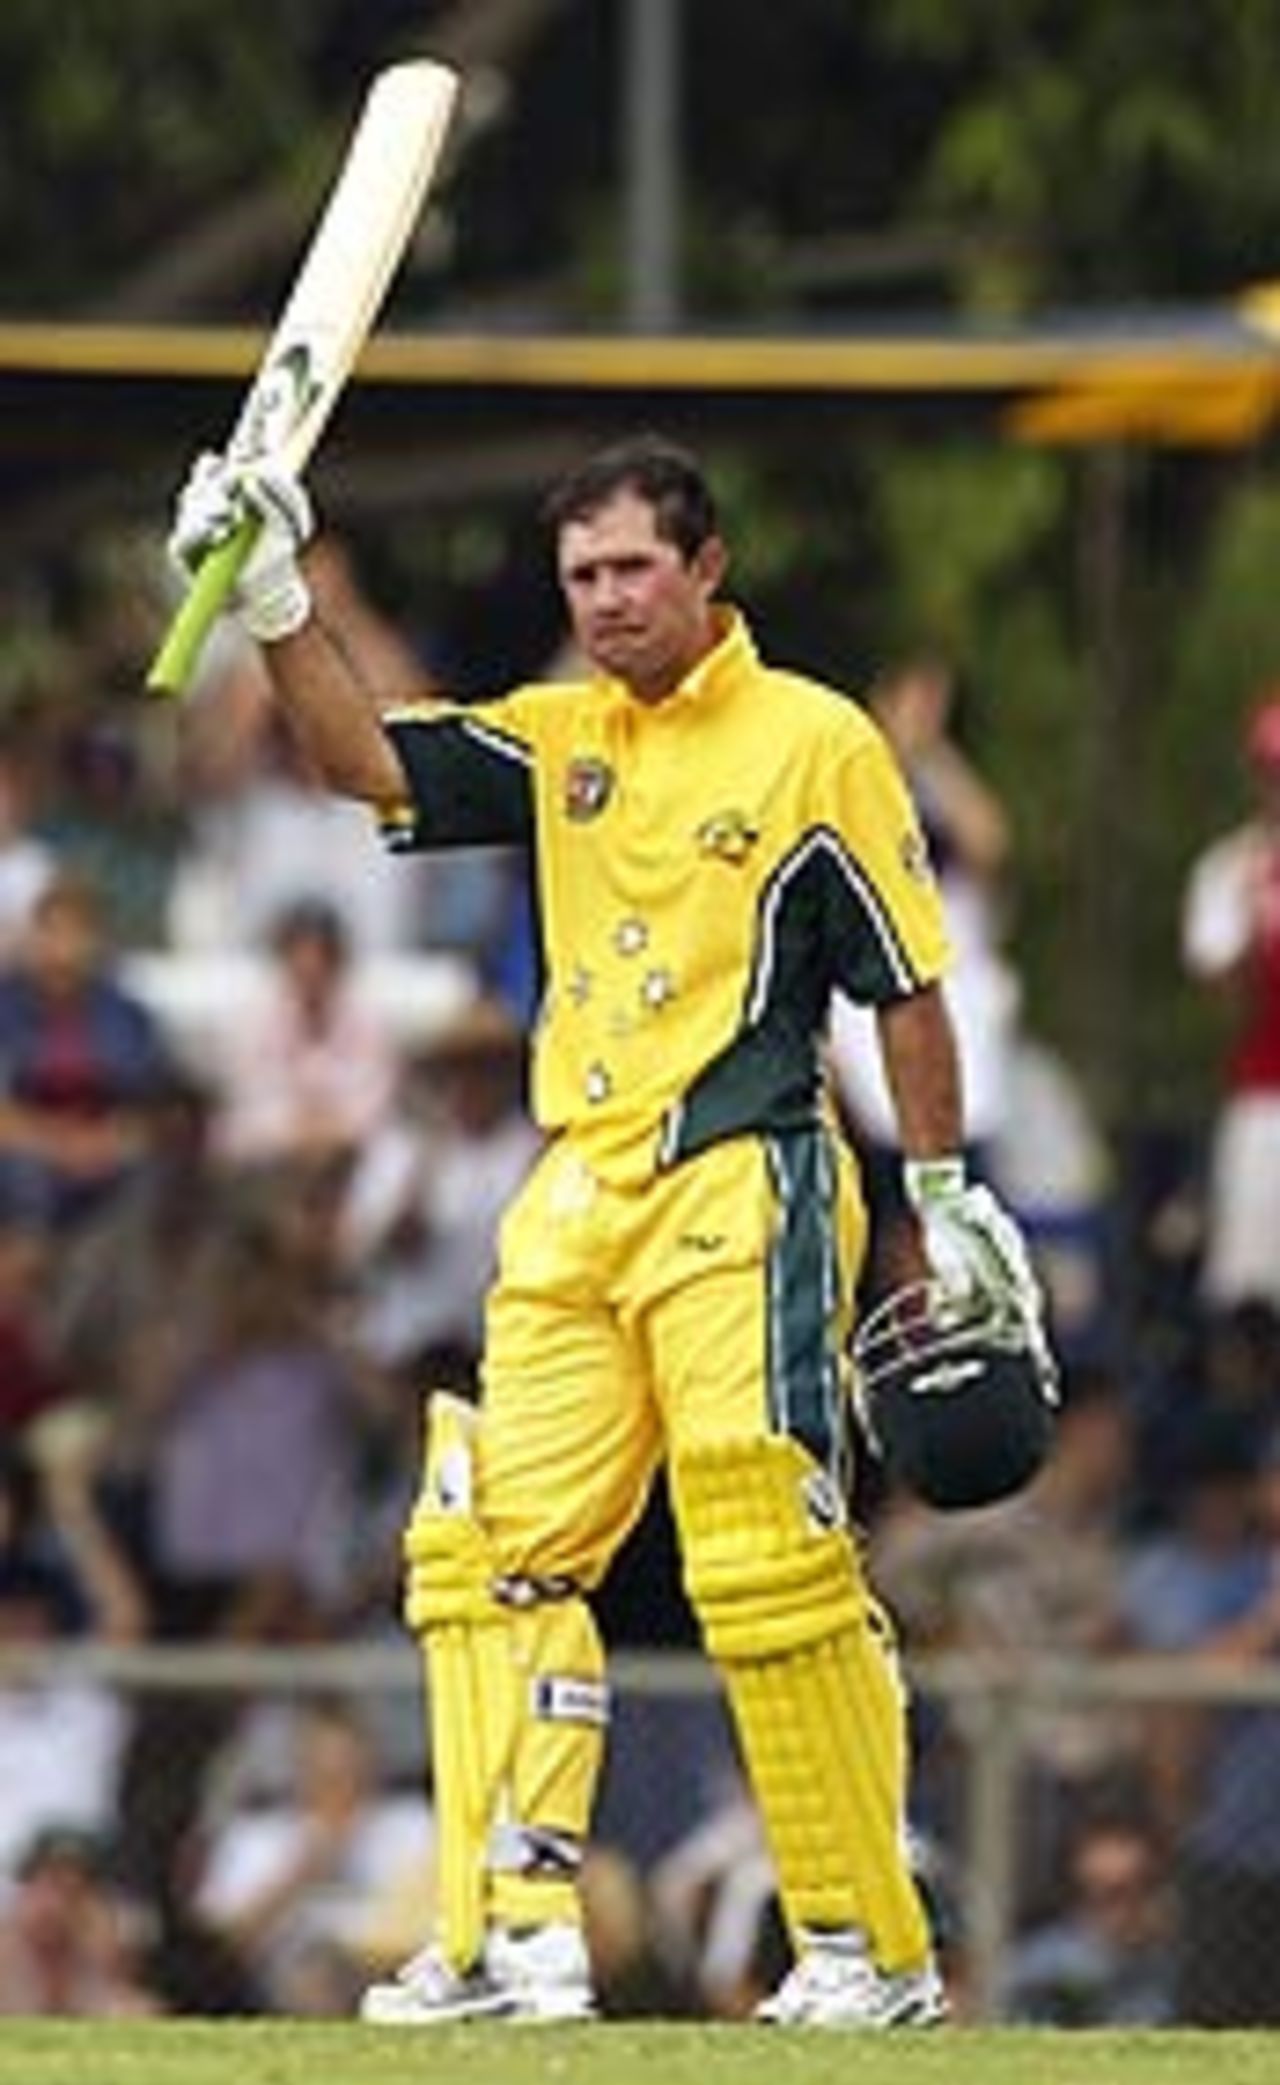 DARWIN, AUSTRALIA - AUGUST 6: Ricky Ponting of Australia reaches 100 during the 3rd One Day International between Australia and Bangladesh played at Marrara Oval on August 6, 2003 in Darwin, Australia.